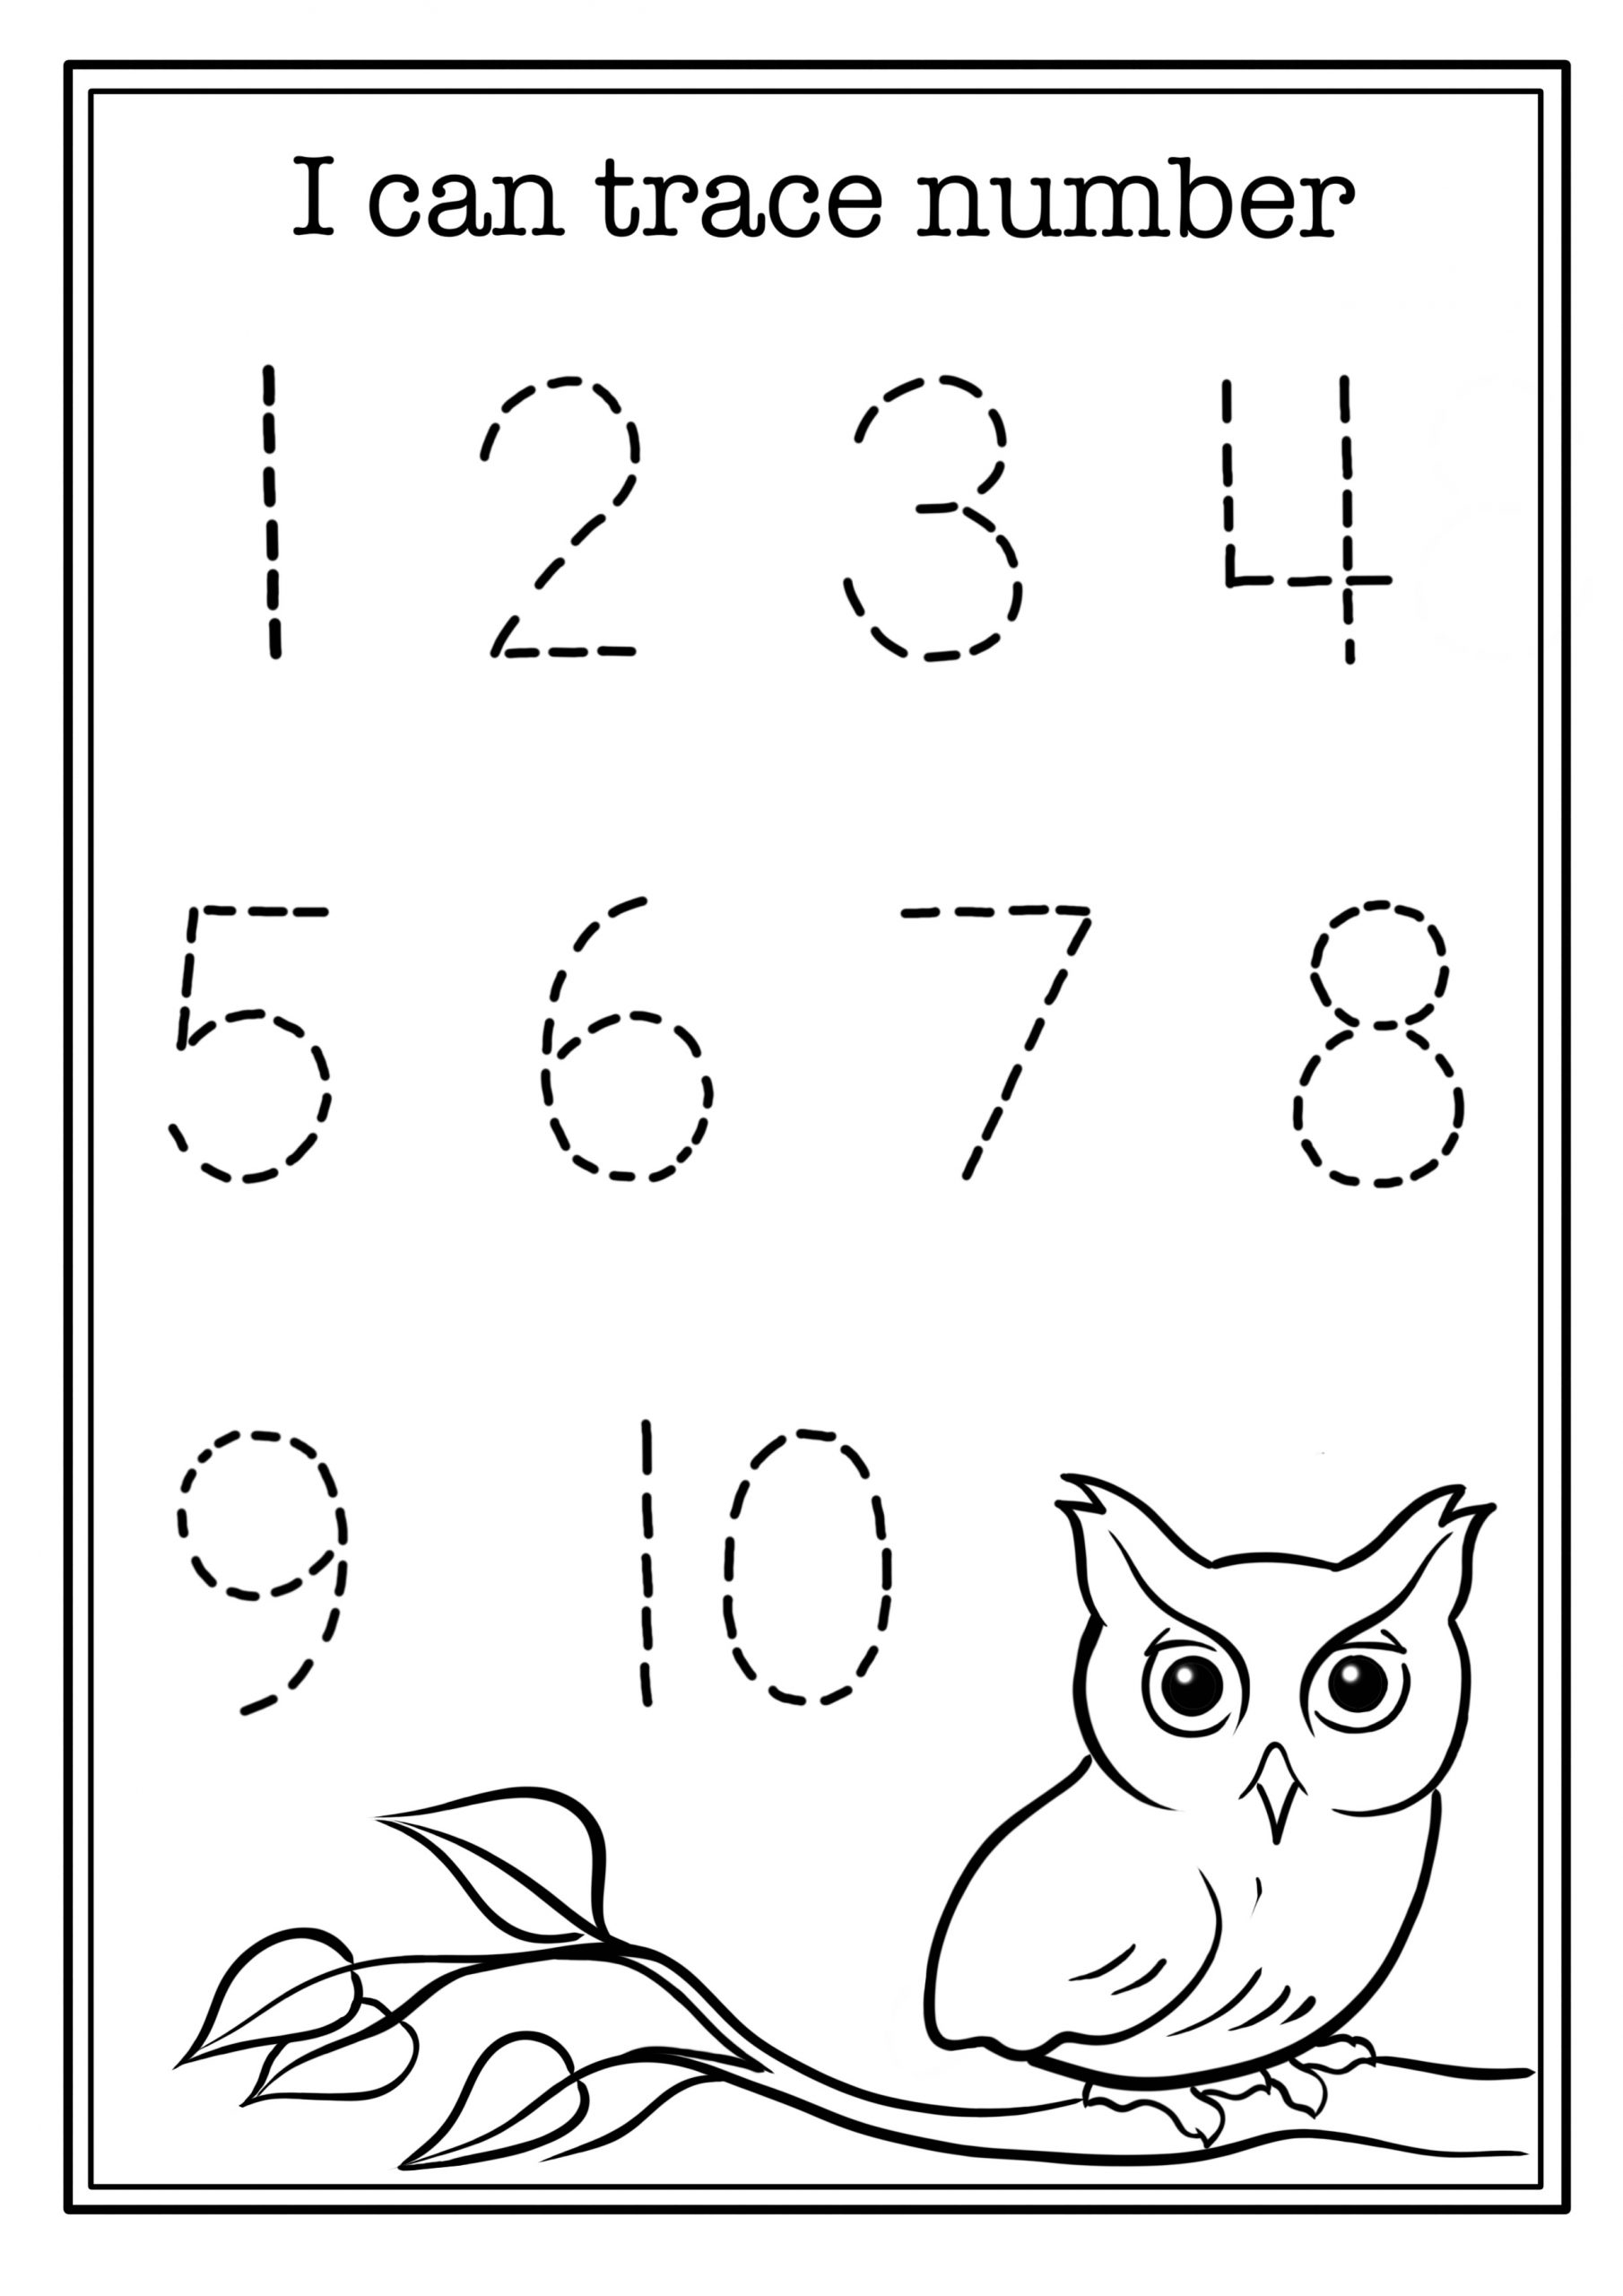 Preschool Lesson Plan On Number Recognition 1 10 With Printables 